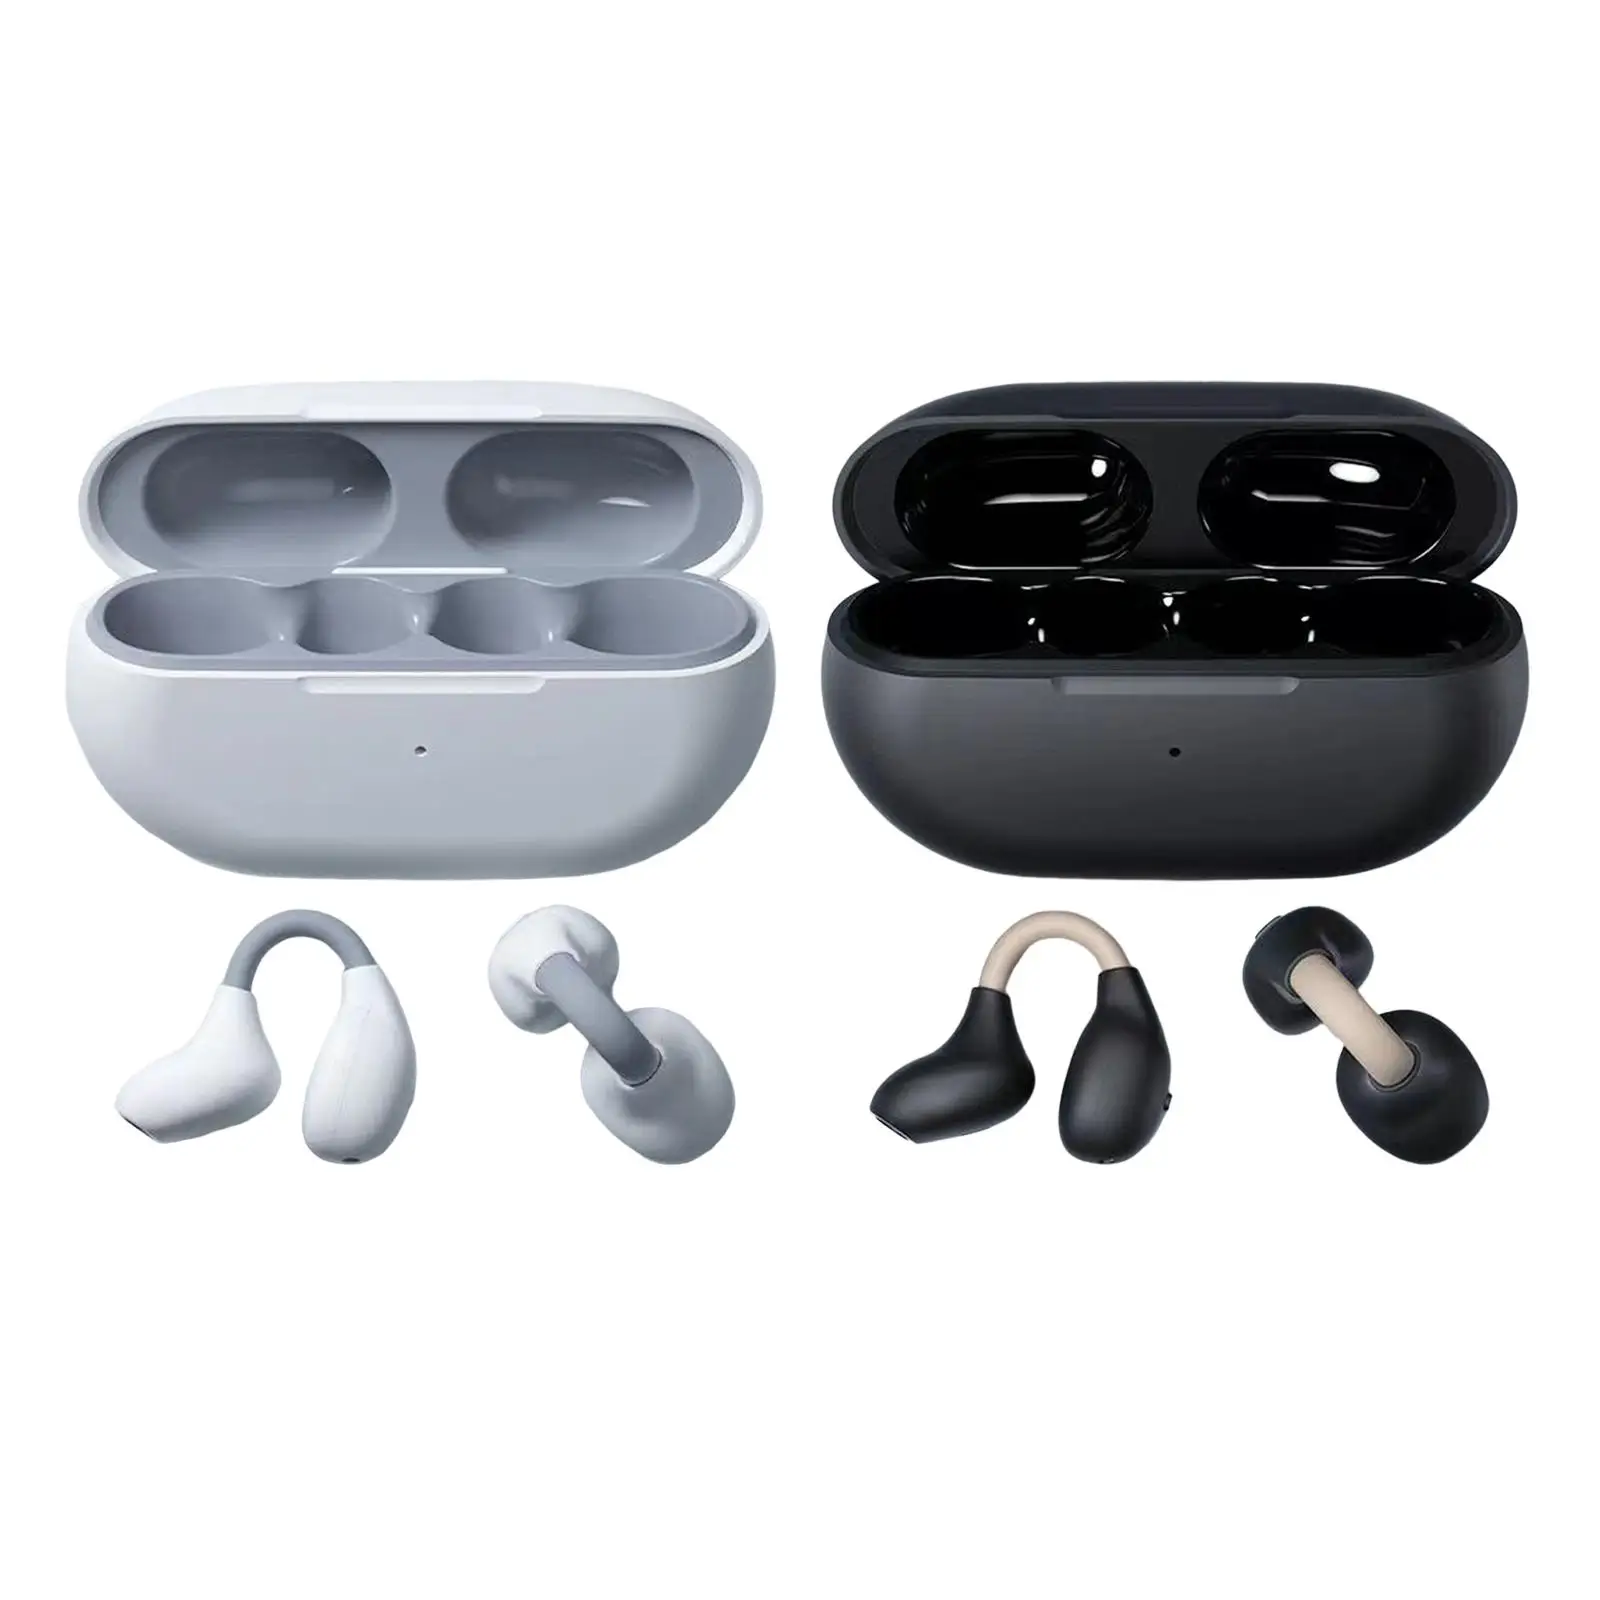 

Ear Clip Wireless Earbuds Headset Calling Noise Reduction Earpiece Hands Free HiFi Sound Clip On Headphones for Fitness Office